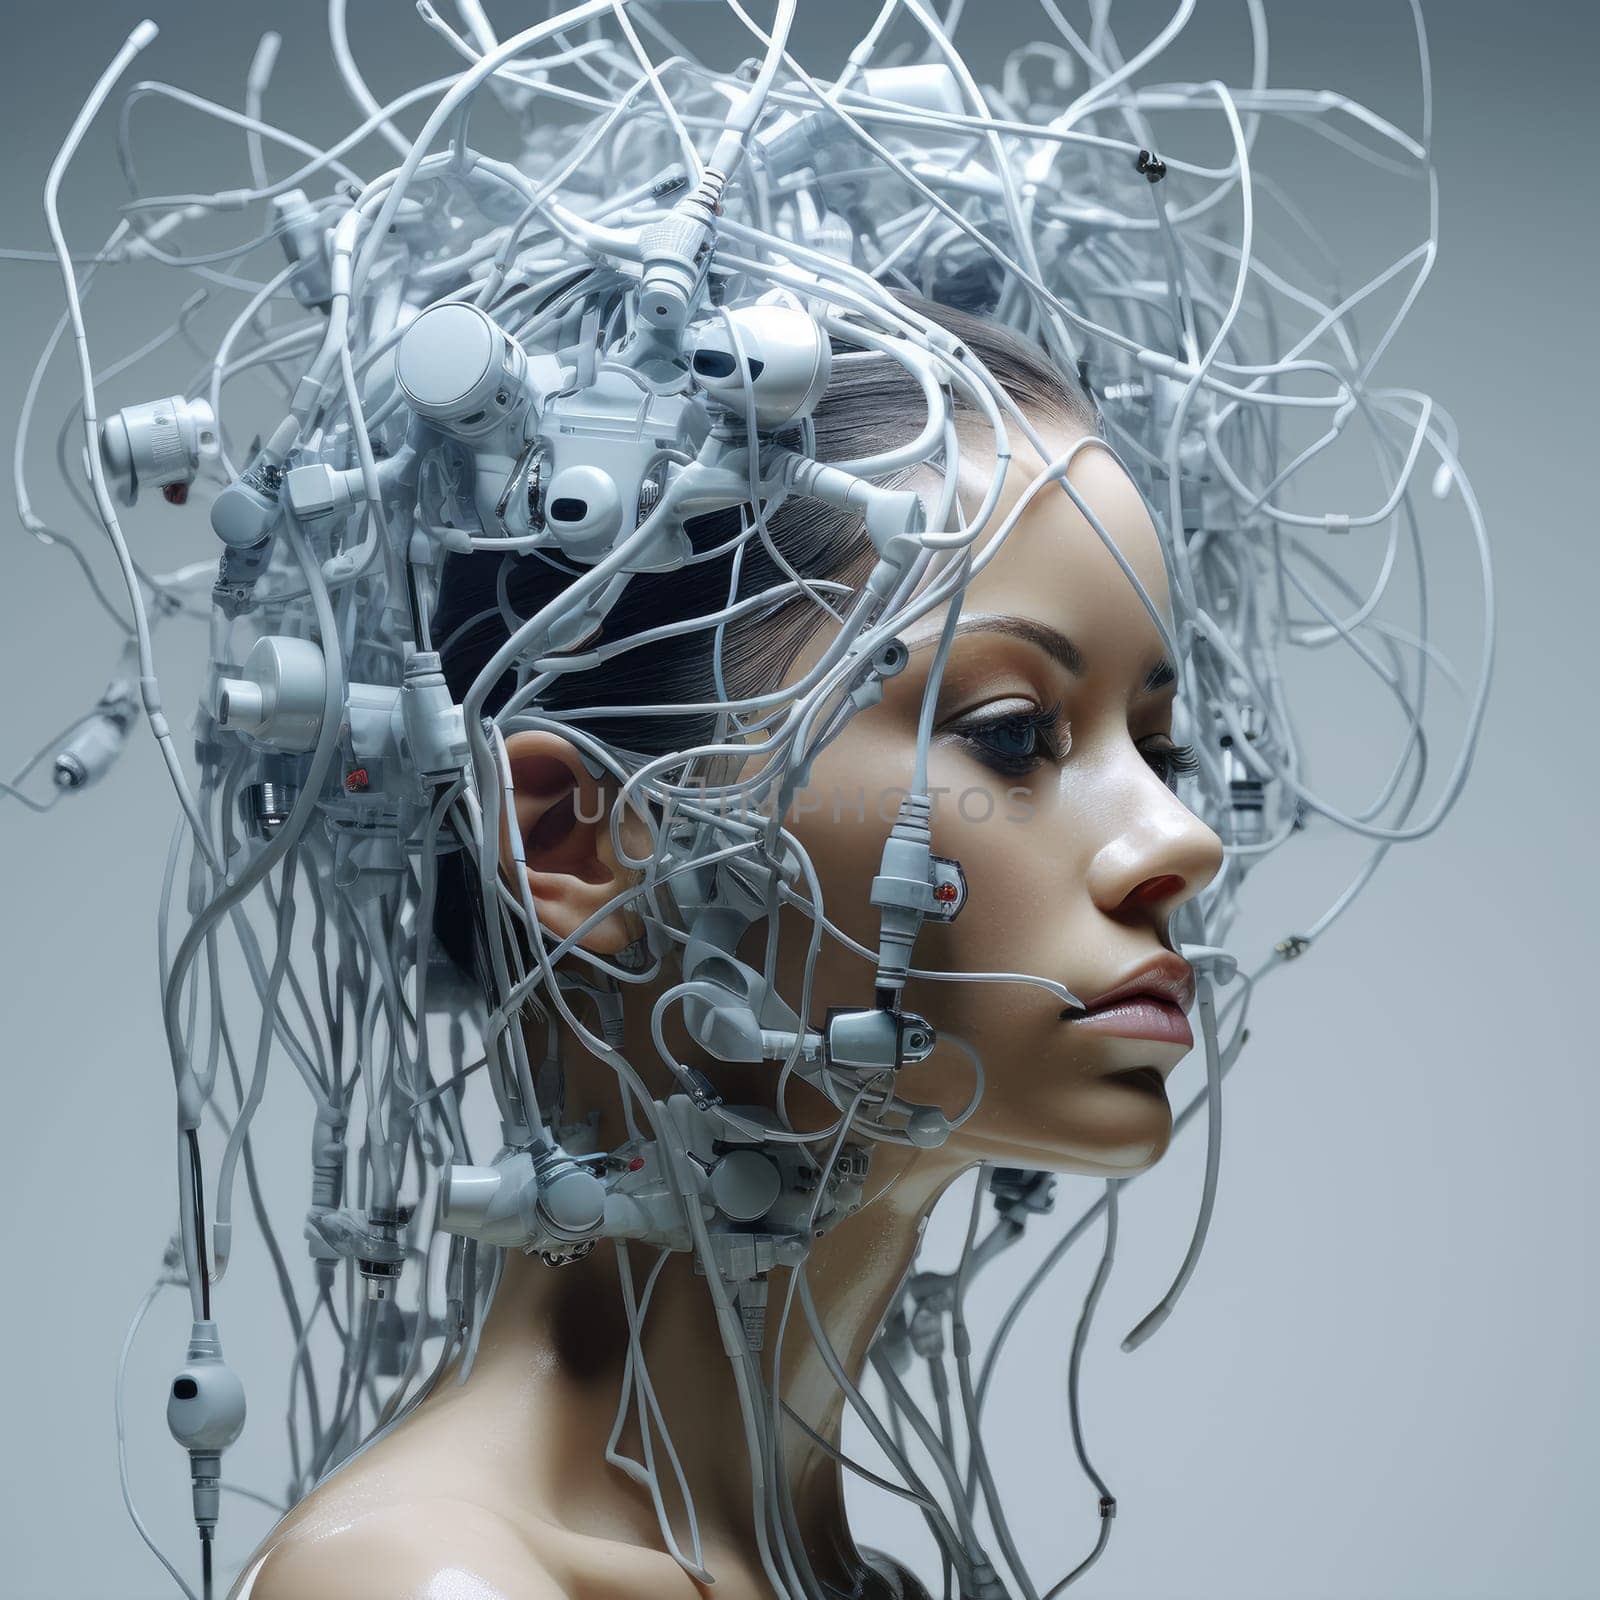 The wires are connected to the head of a young woman by cherezoff